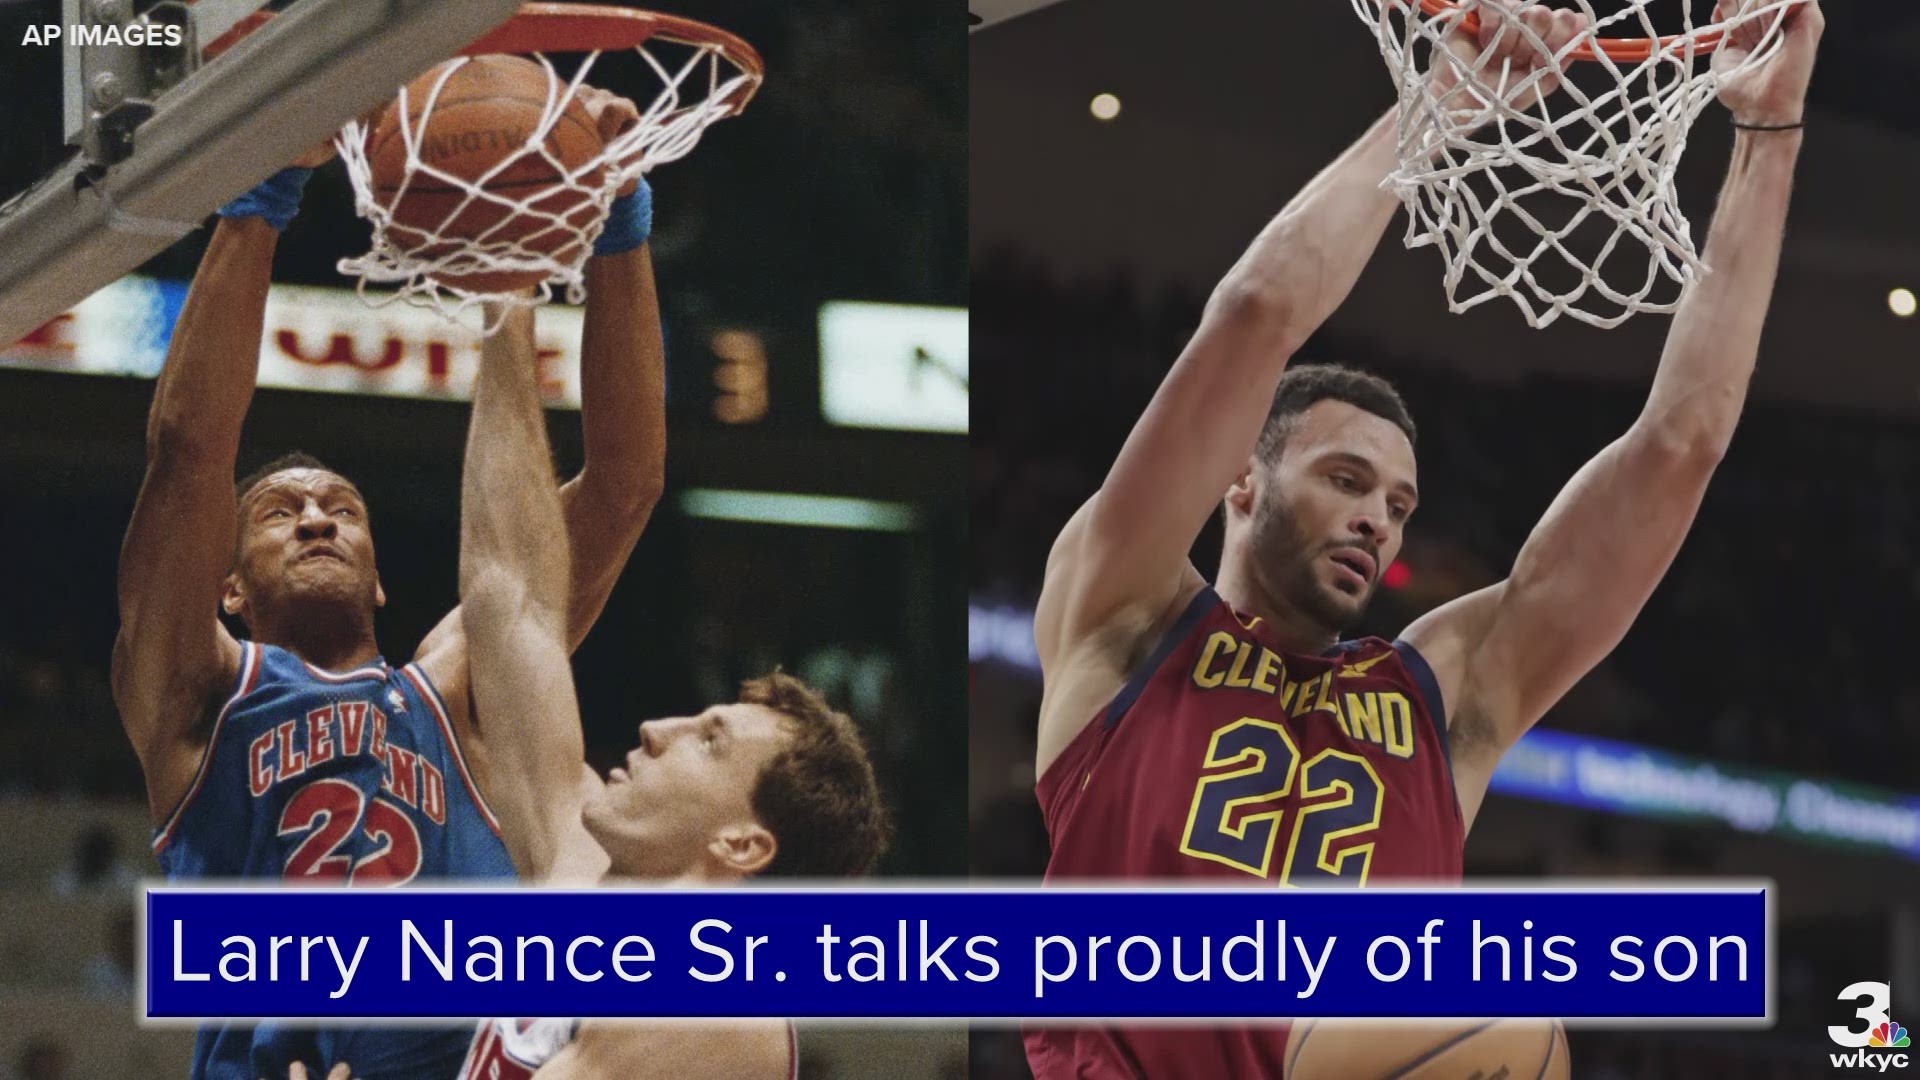 Cleveland Cavaliers Larry Nance Jr. offers charity apparel line